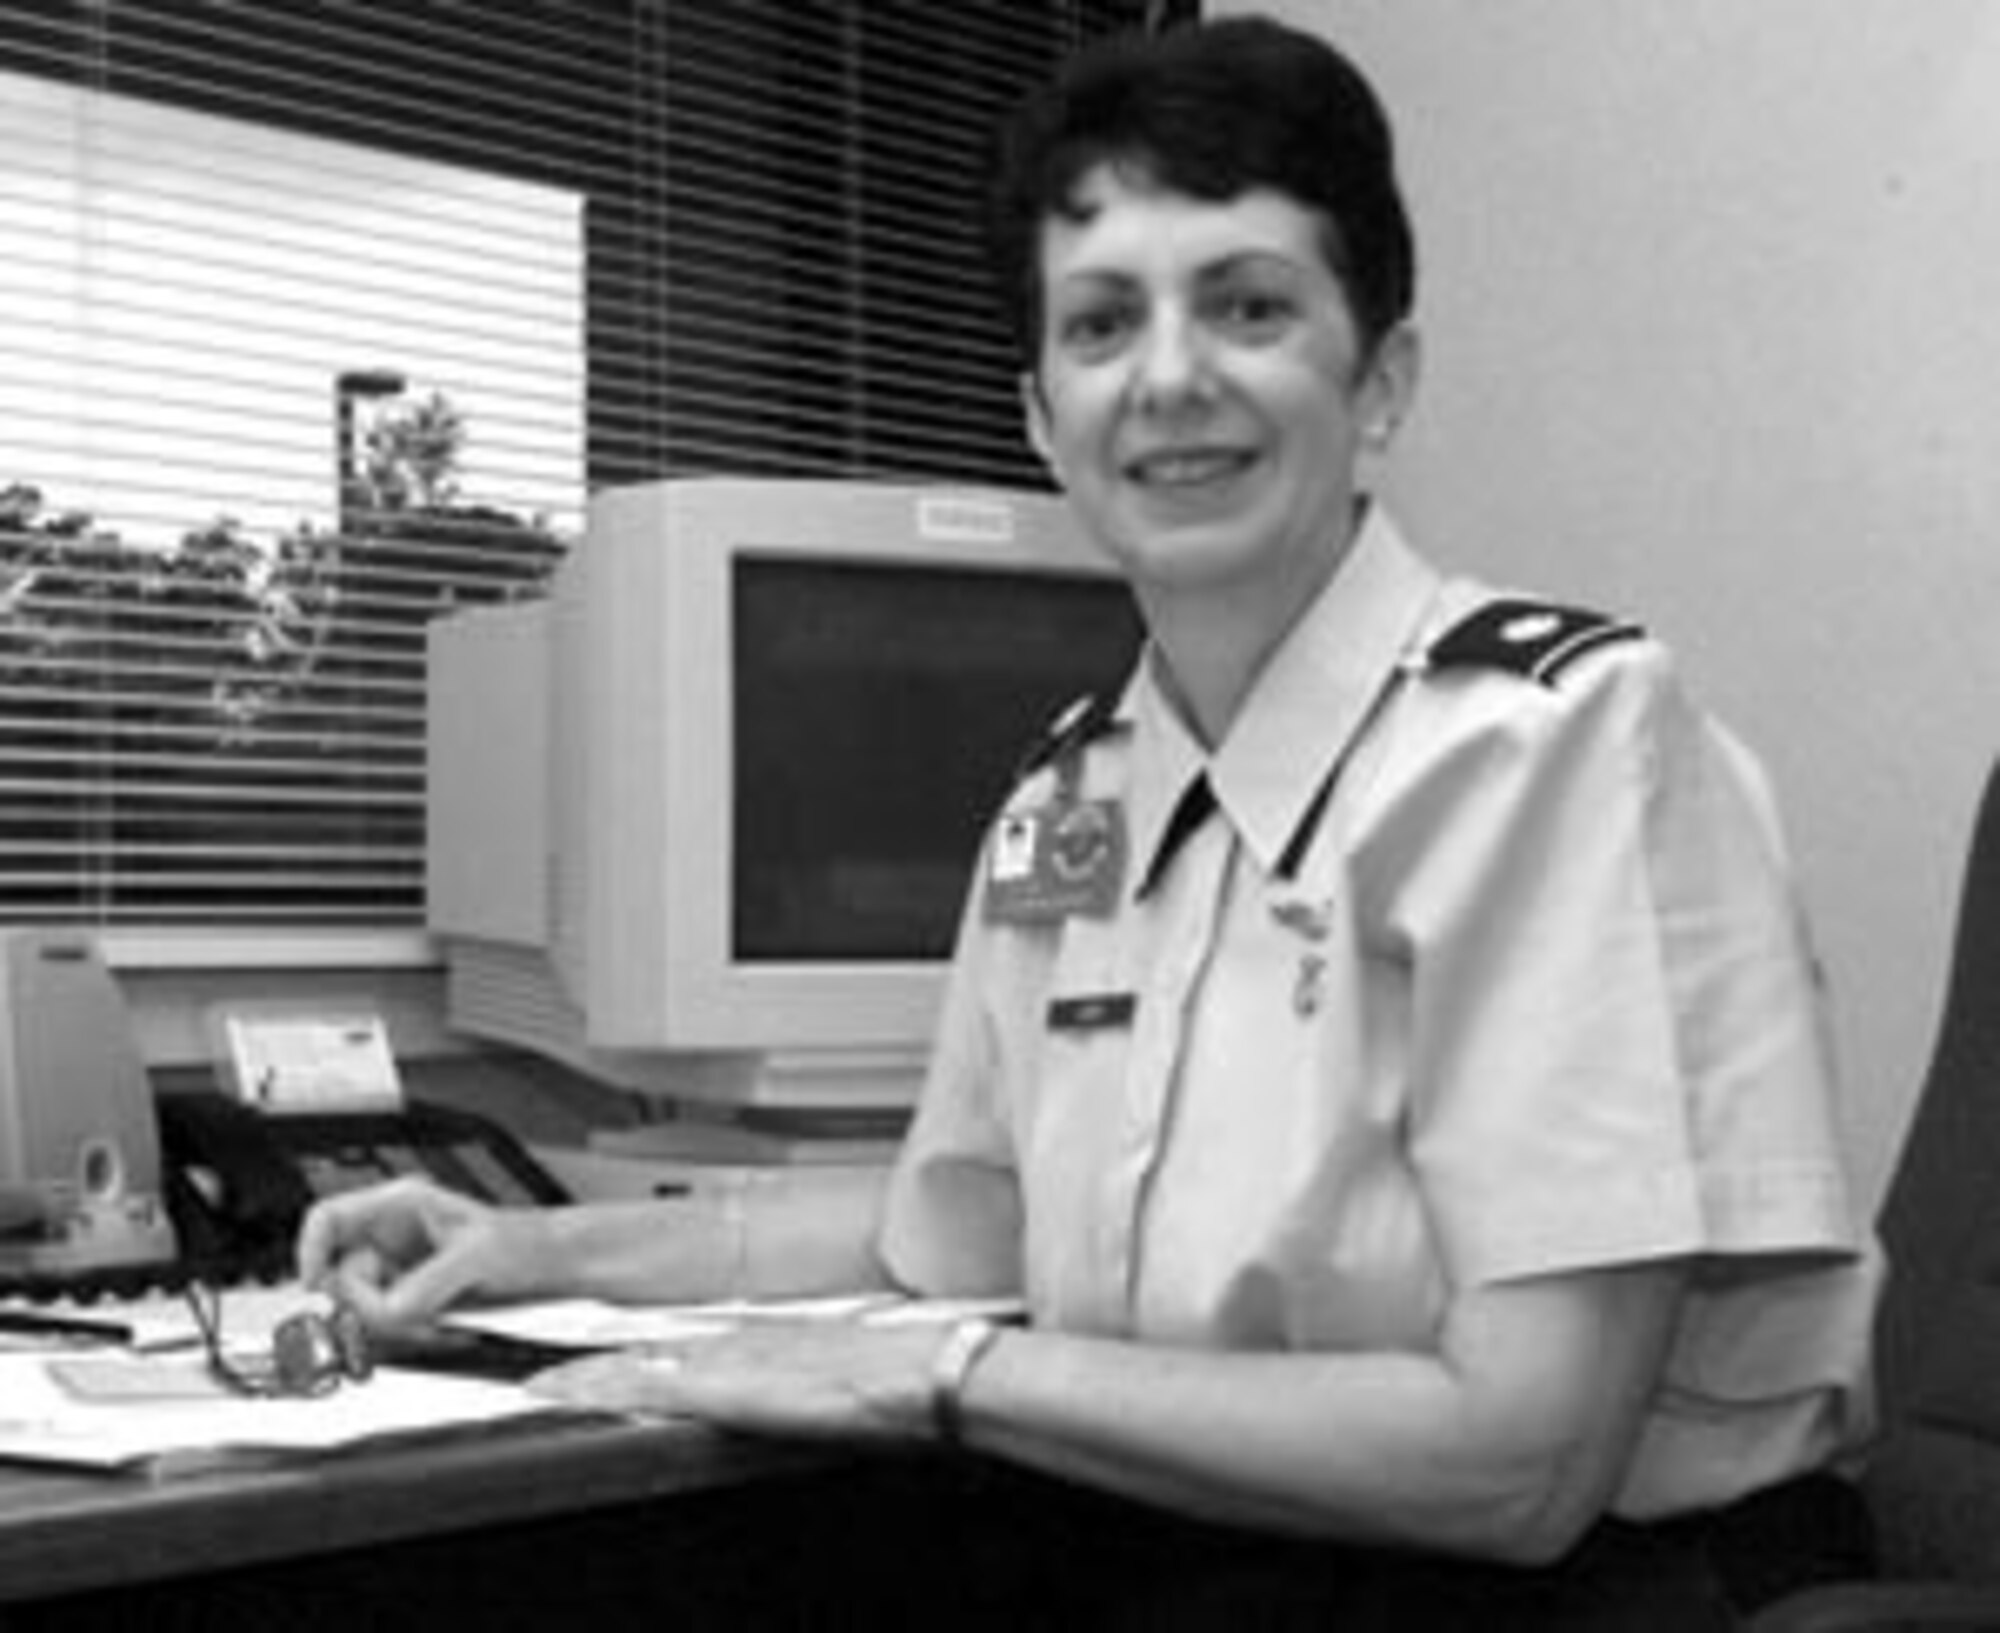 1970's -- Then Lt. Col. Regina Aune, 437th Medical Operations Sqaudron commander, Charleston Air Force Base, S.C., recounts an experience in Vietnam that saved and changed lives.  While a lieutenant in the spring of 1975, flight nurse Regina Aune became the first and only woman to receive the Cheney Award, recognizing an act of valor "in a humanitarian interest performed in connection with aircraft." She did it saving orphans during "Operation Babylift."